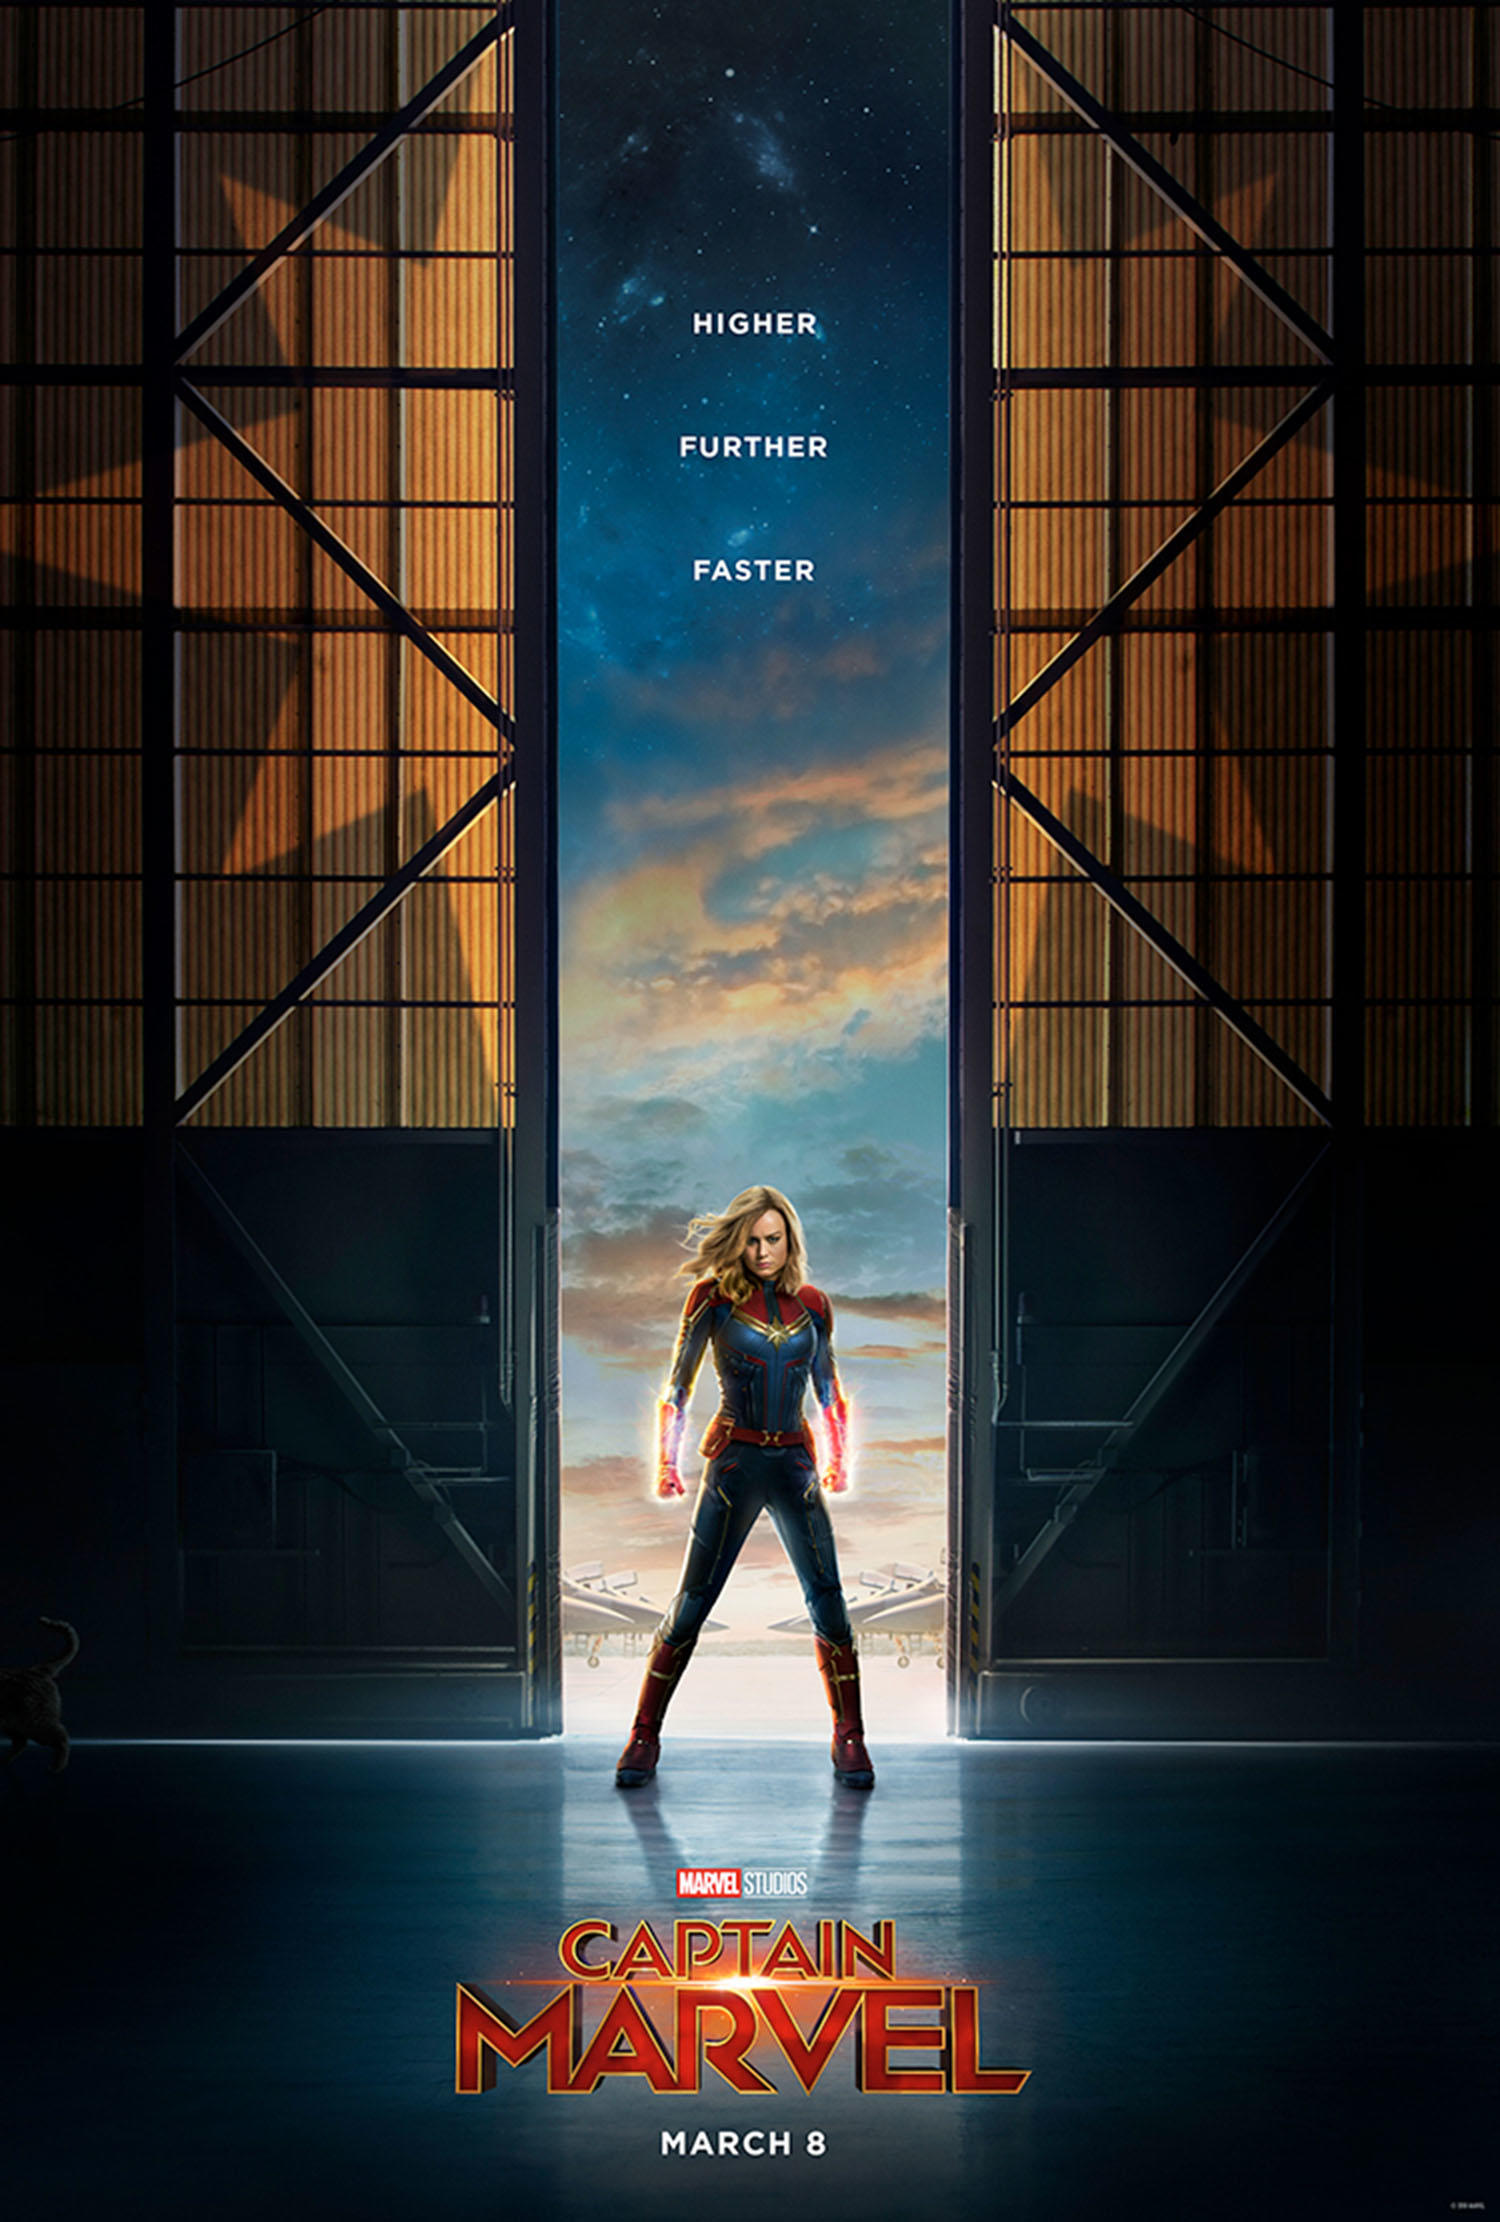 Marvel Studios Releases Captain Marvel Trailer and Poster Introducing a New Hero and Old Friends